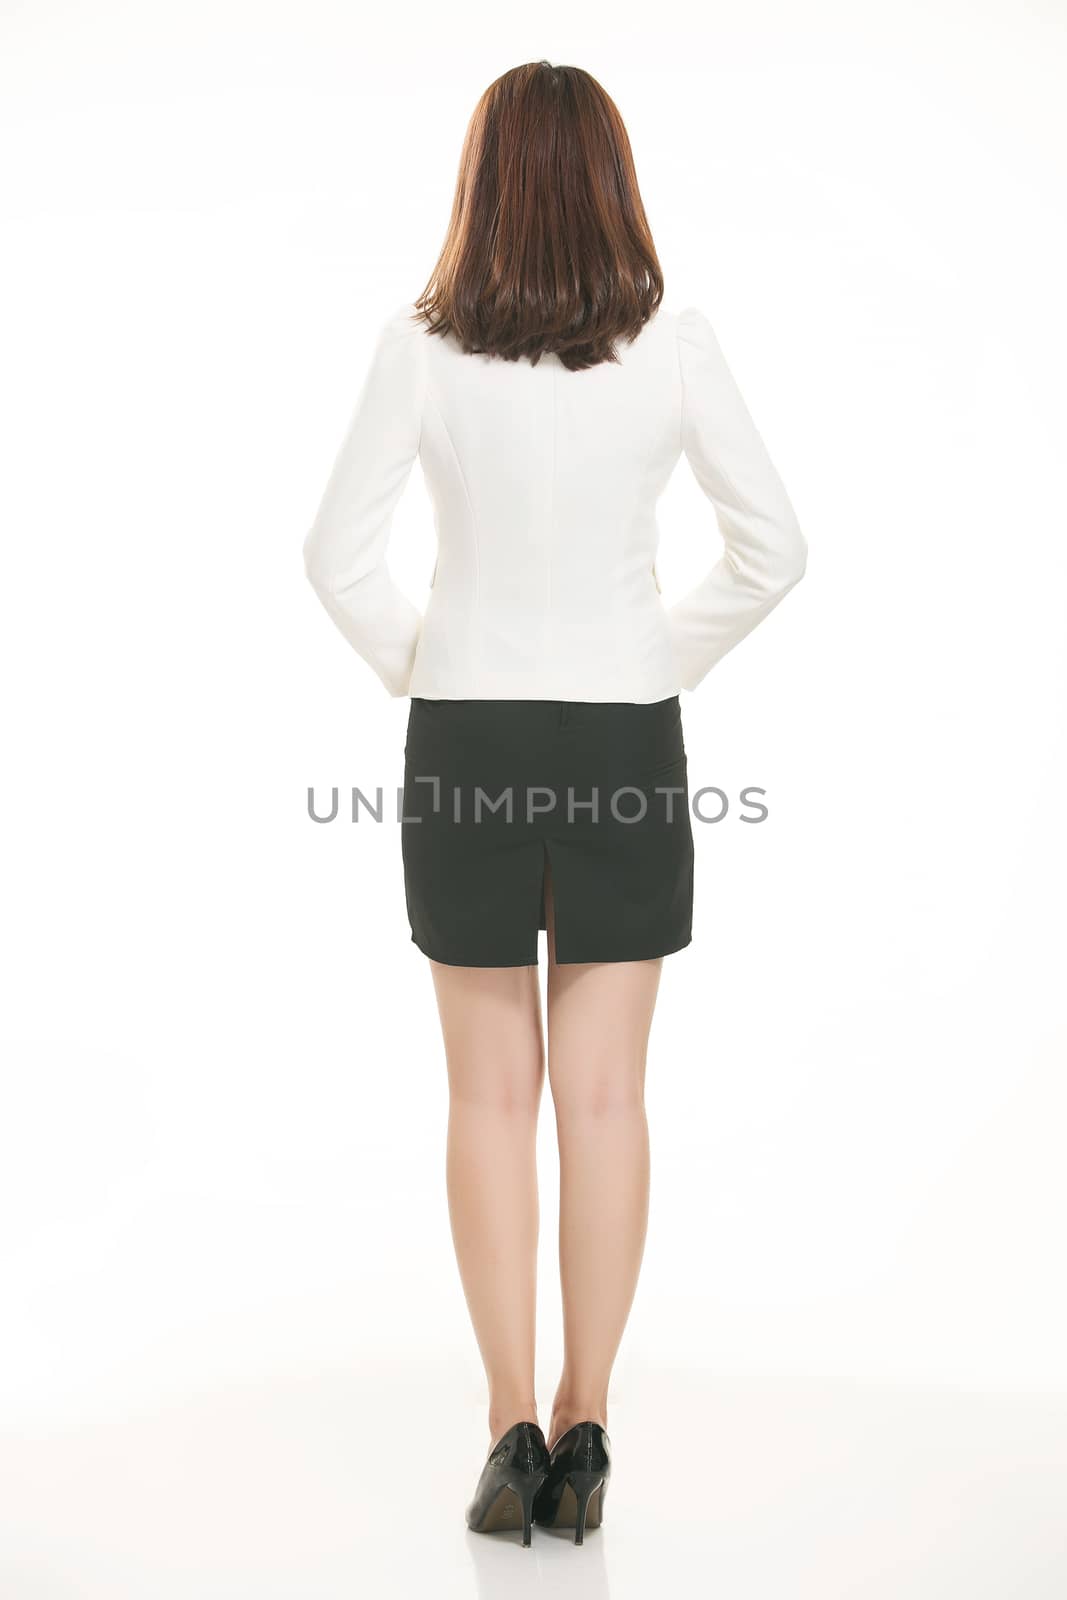 Young Asian women wearing a suit in front of a white background